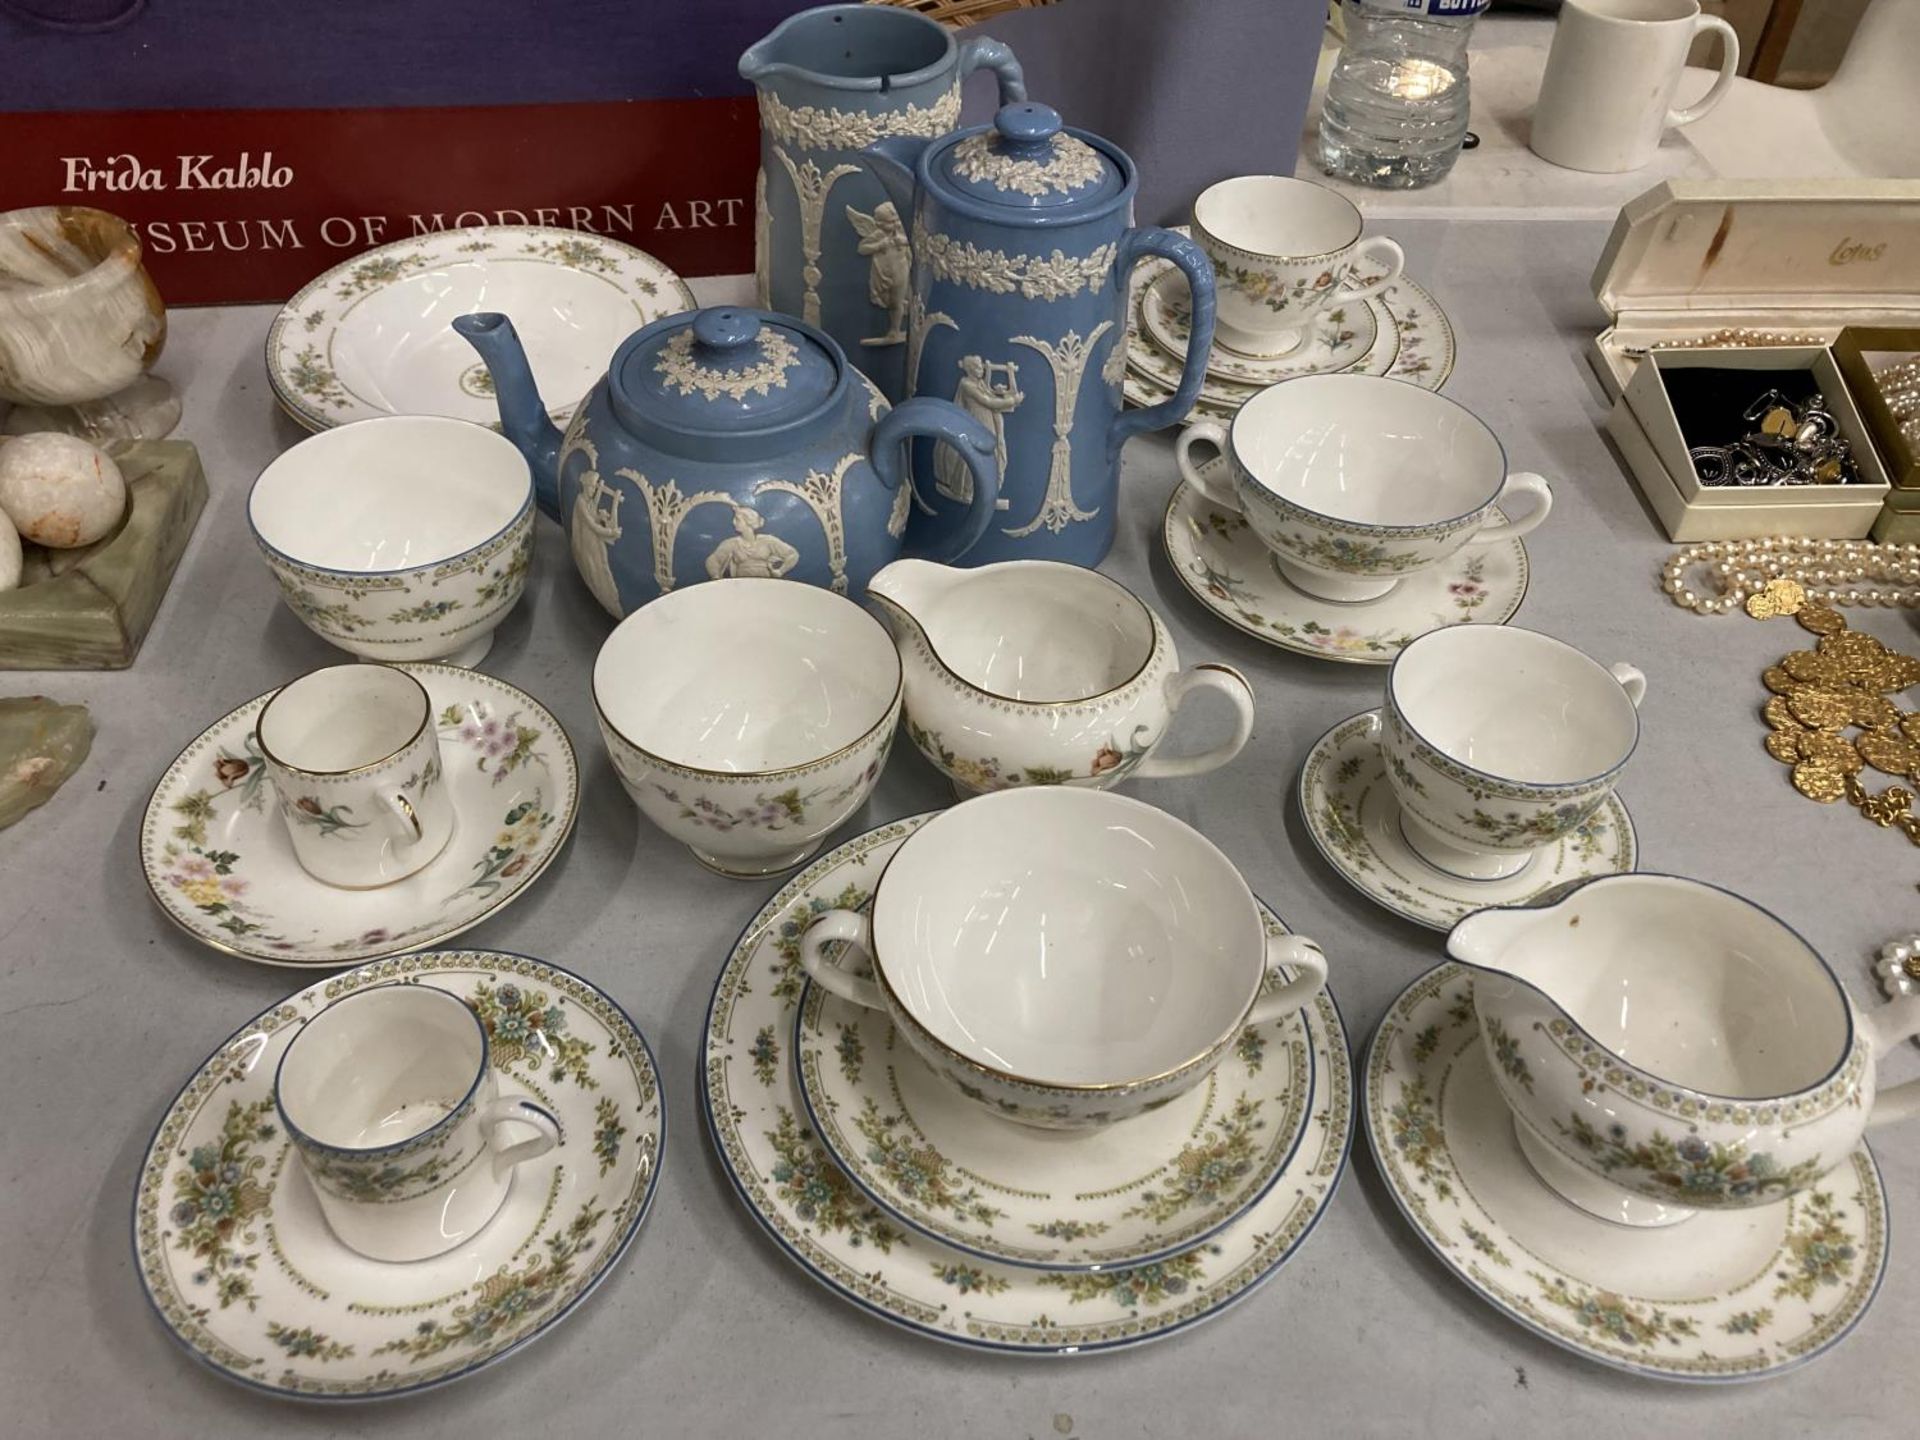 A QUANTITY OF WEDGWOOD CHINA TEAWARE TO INCLUDE CUPS, SAUCERS, BOWLS, PLATES, ETC, PLUS 'DUDSON'